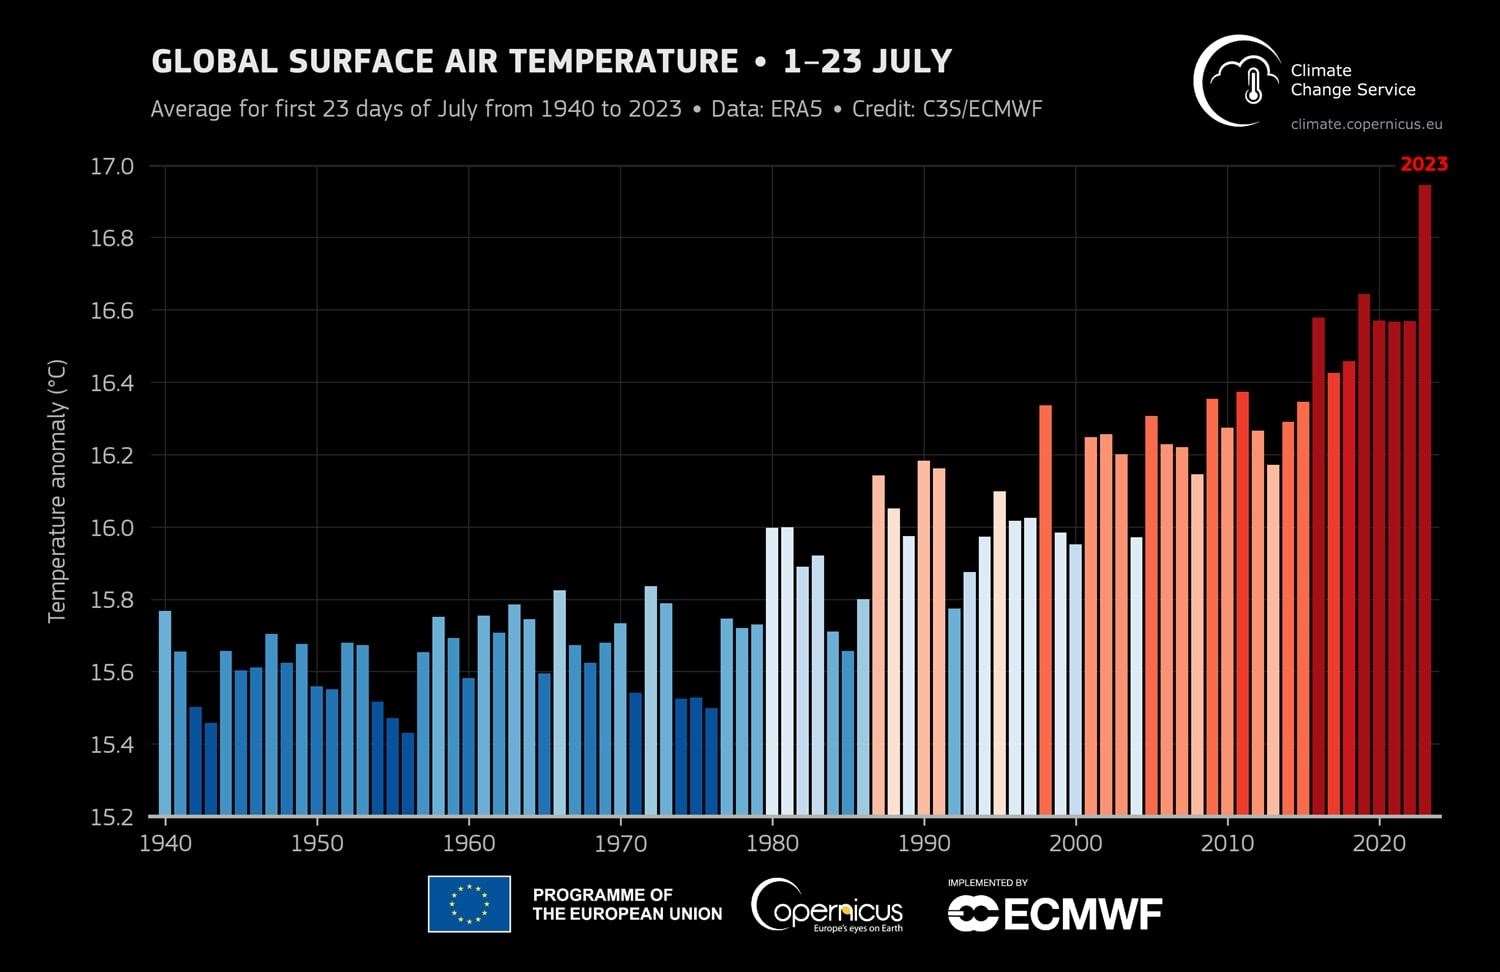 The global temperature has been rising over the decades because of greenhouse gases emitted by humans (C3S/ECMWF/PA)